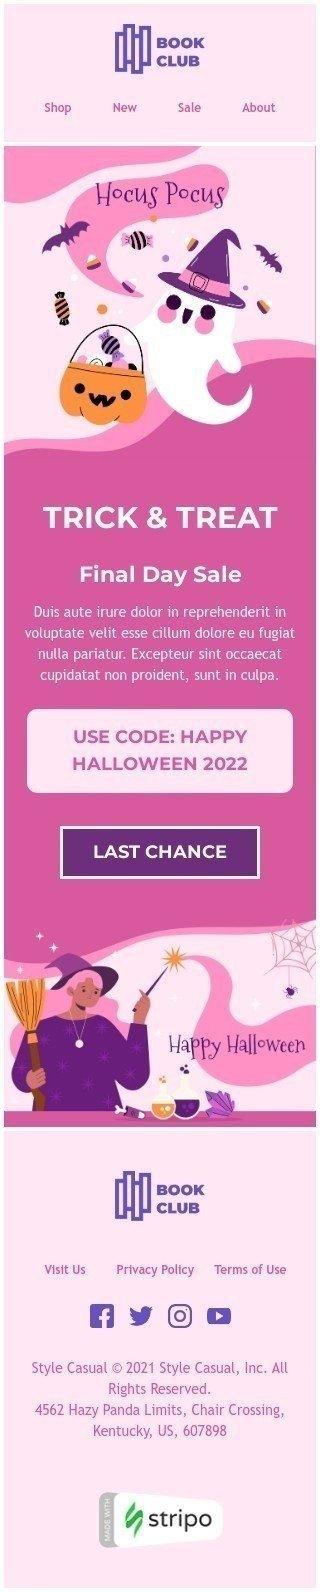 Halloween Email Template "Trick and Treat" for Books & Presents & Stationery industry mobile view